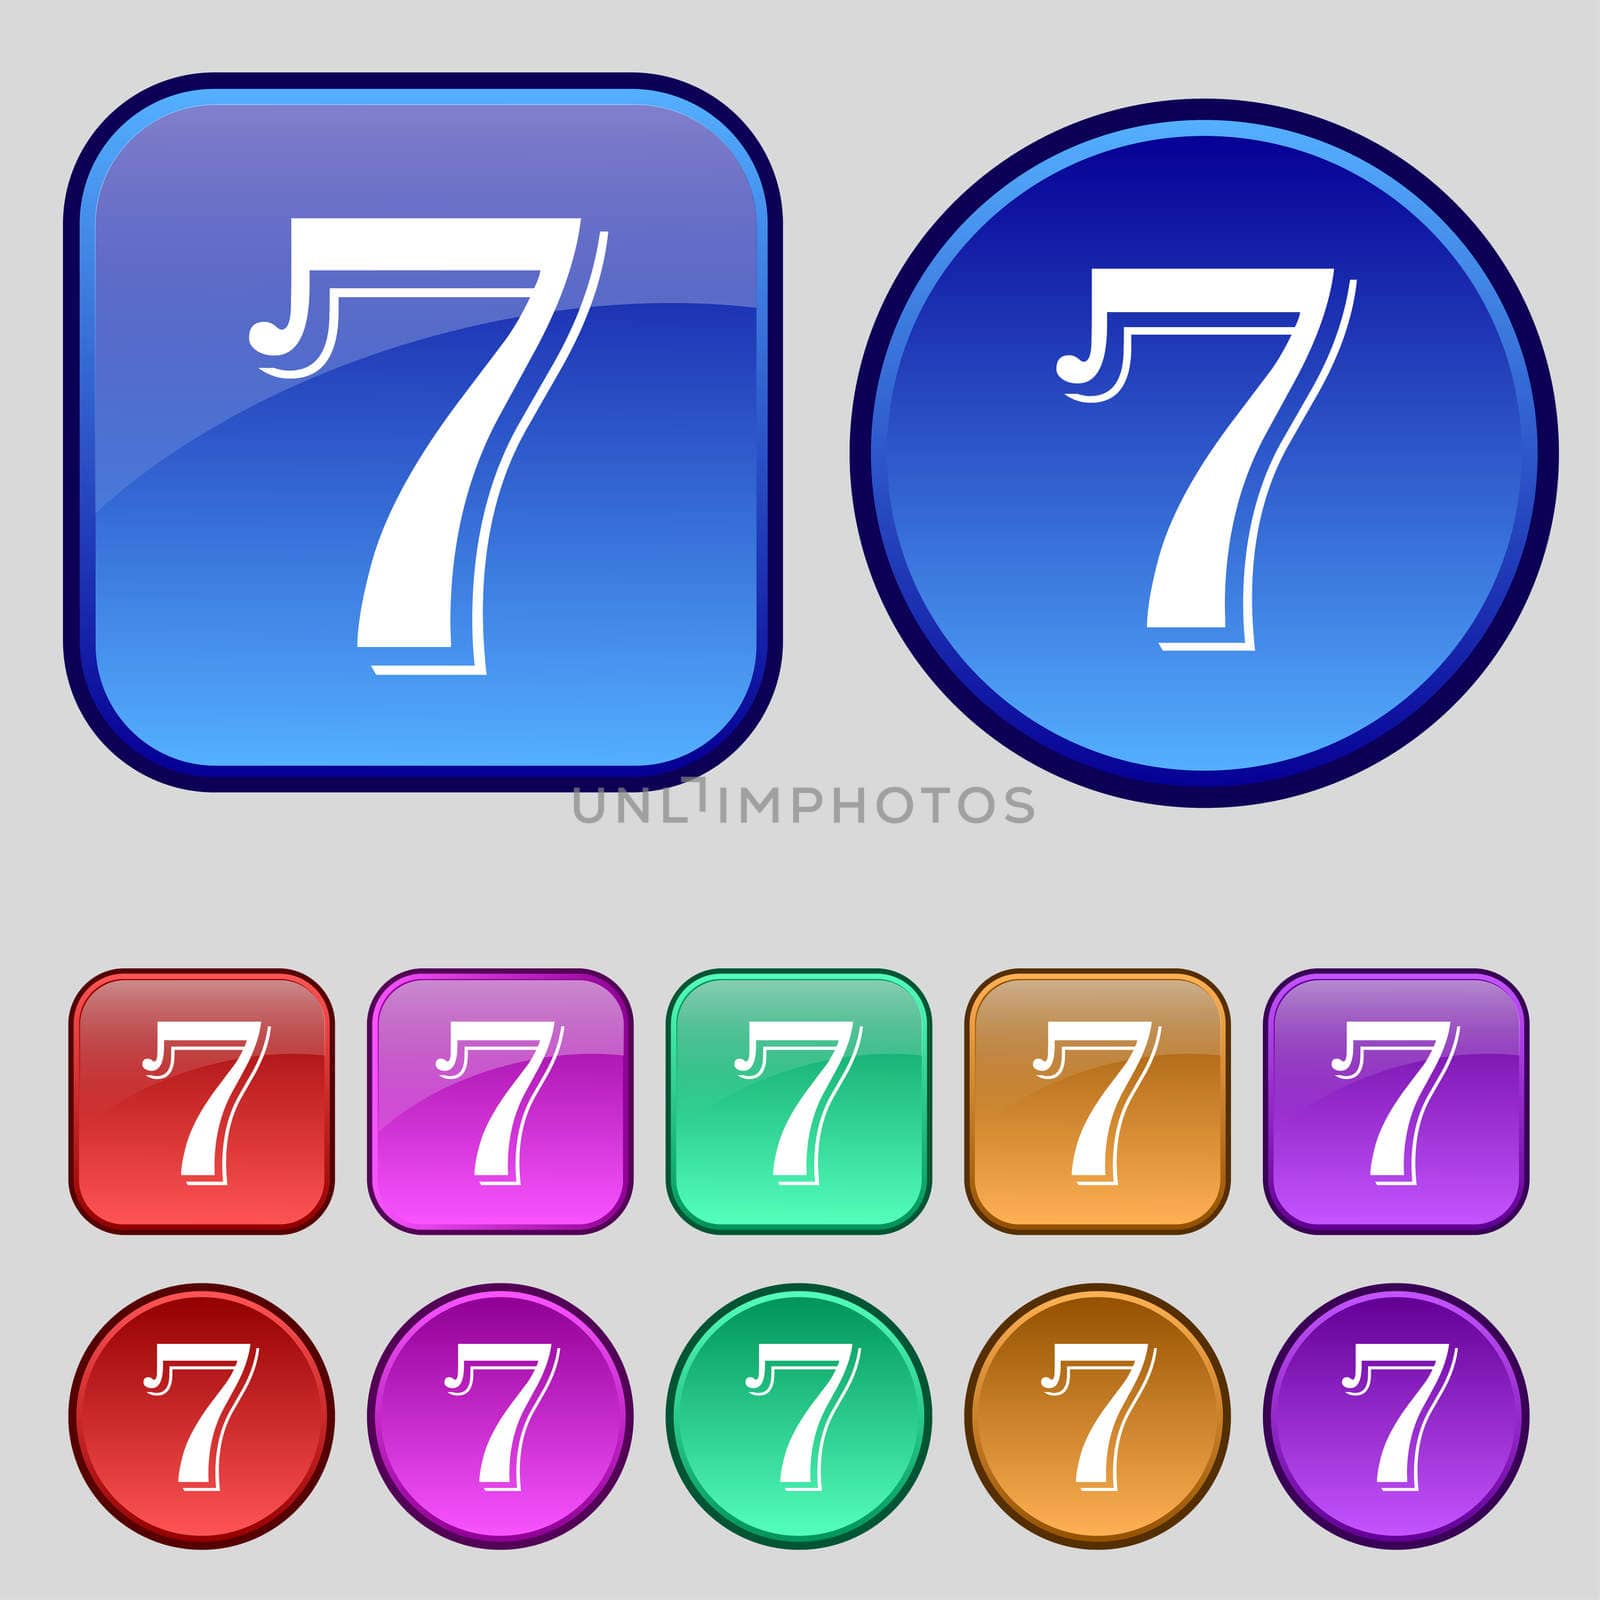 number seven icon sign. Set of coloured buttons. illustration